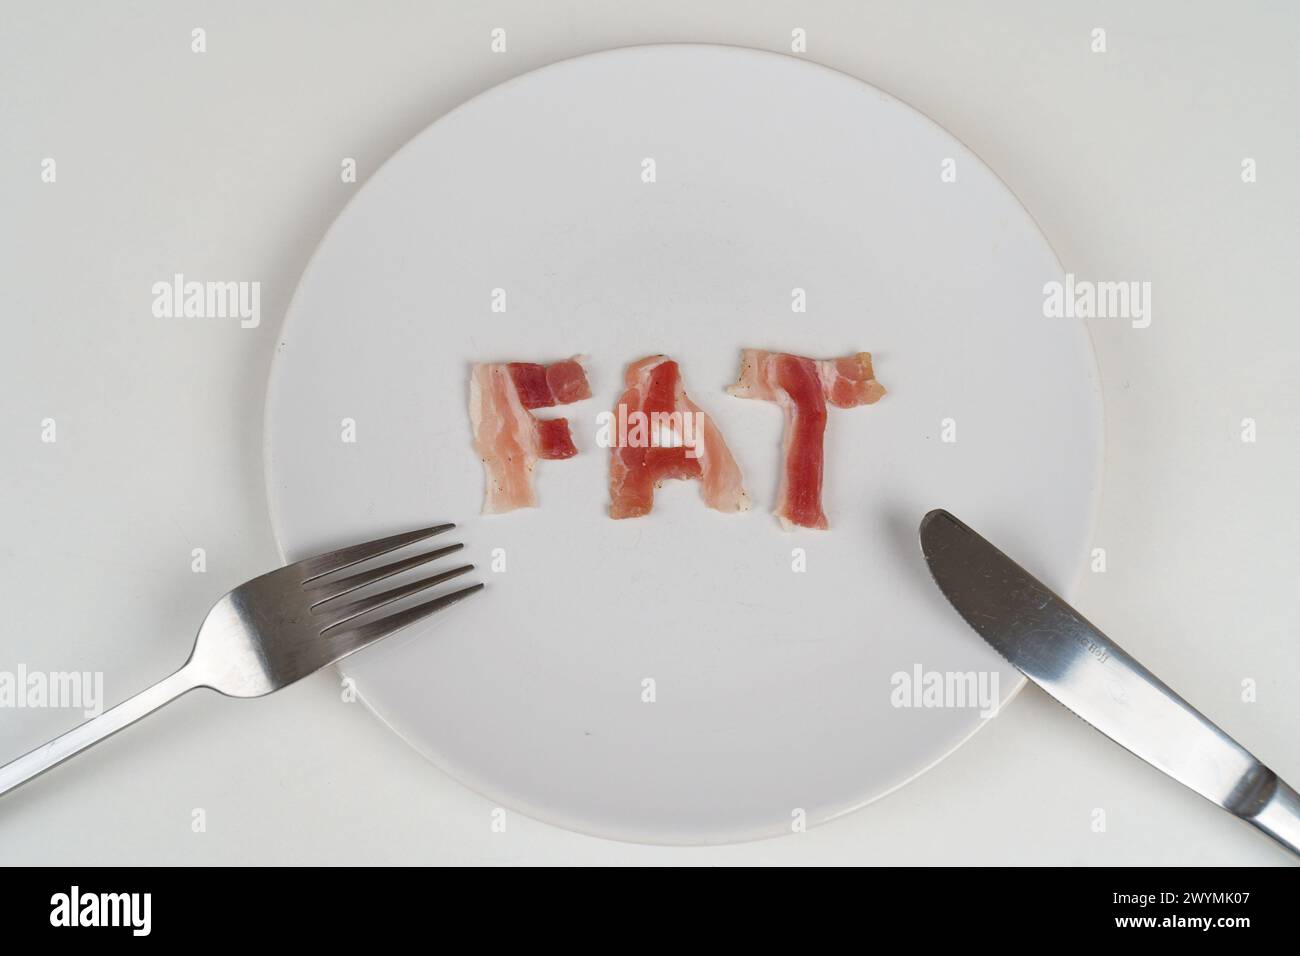 A plate with the word fat on it, accompanied by a fork and knife, symbolizing unhealthy eating habits. Stock Photo